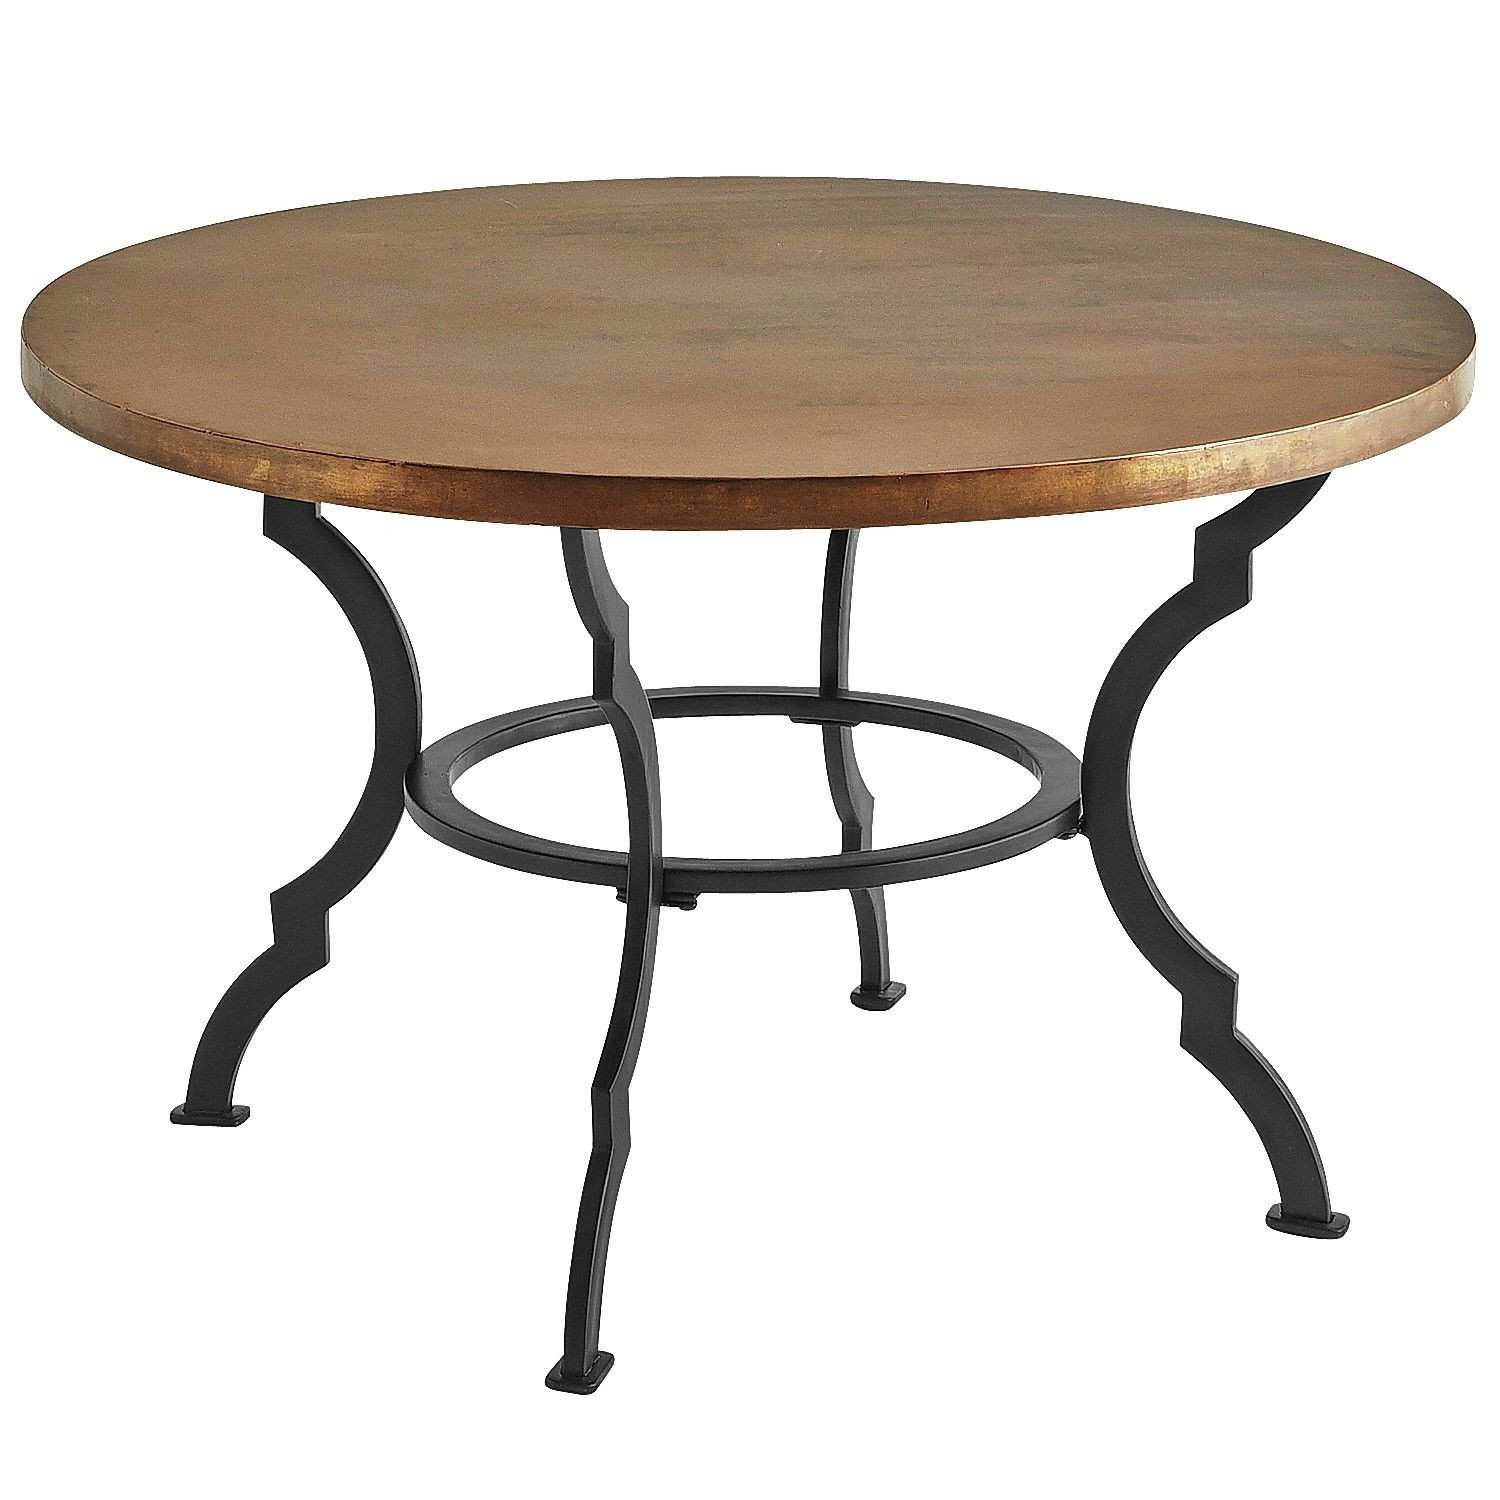 stunning pier one accent tables for utby table ideas awesome colton coffee imports and side kenzie black mirrored vintage octagon round dining set concrete end tiffany lamps